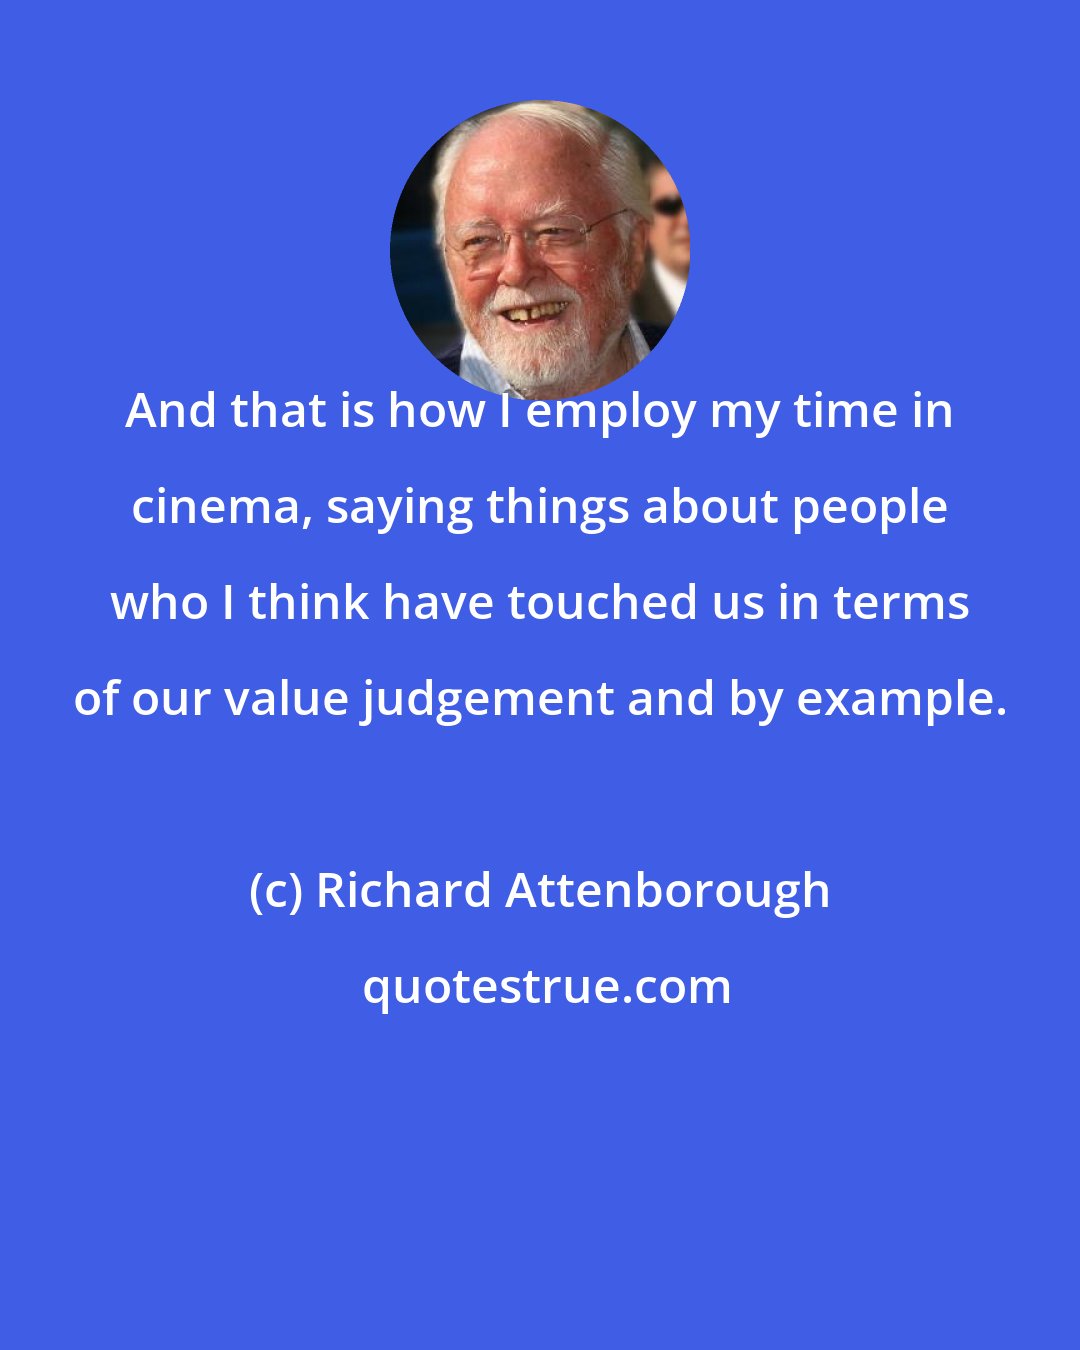 Richard Attenborough: And that is how I employ my time in cinema, saying things about people who I think have touched us in terms of our value judgement and by example.